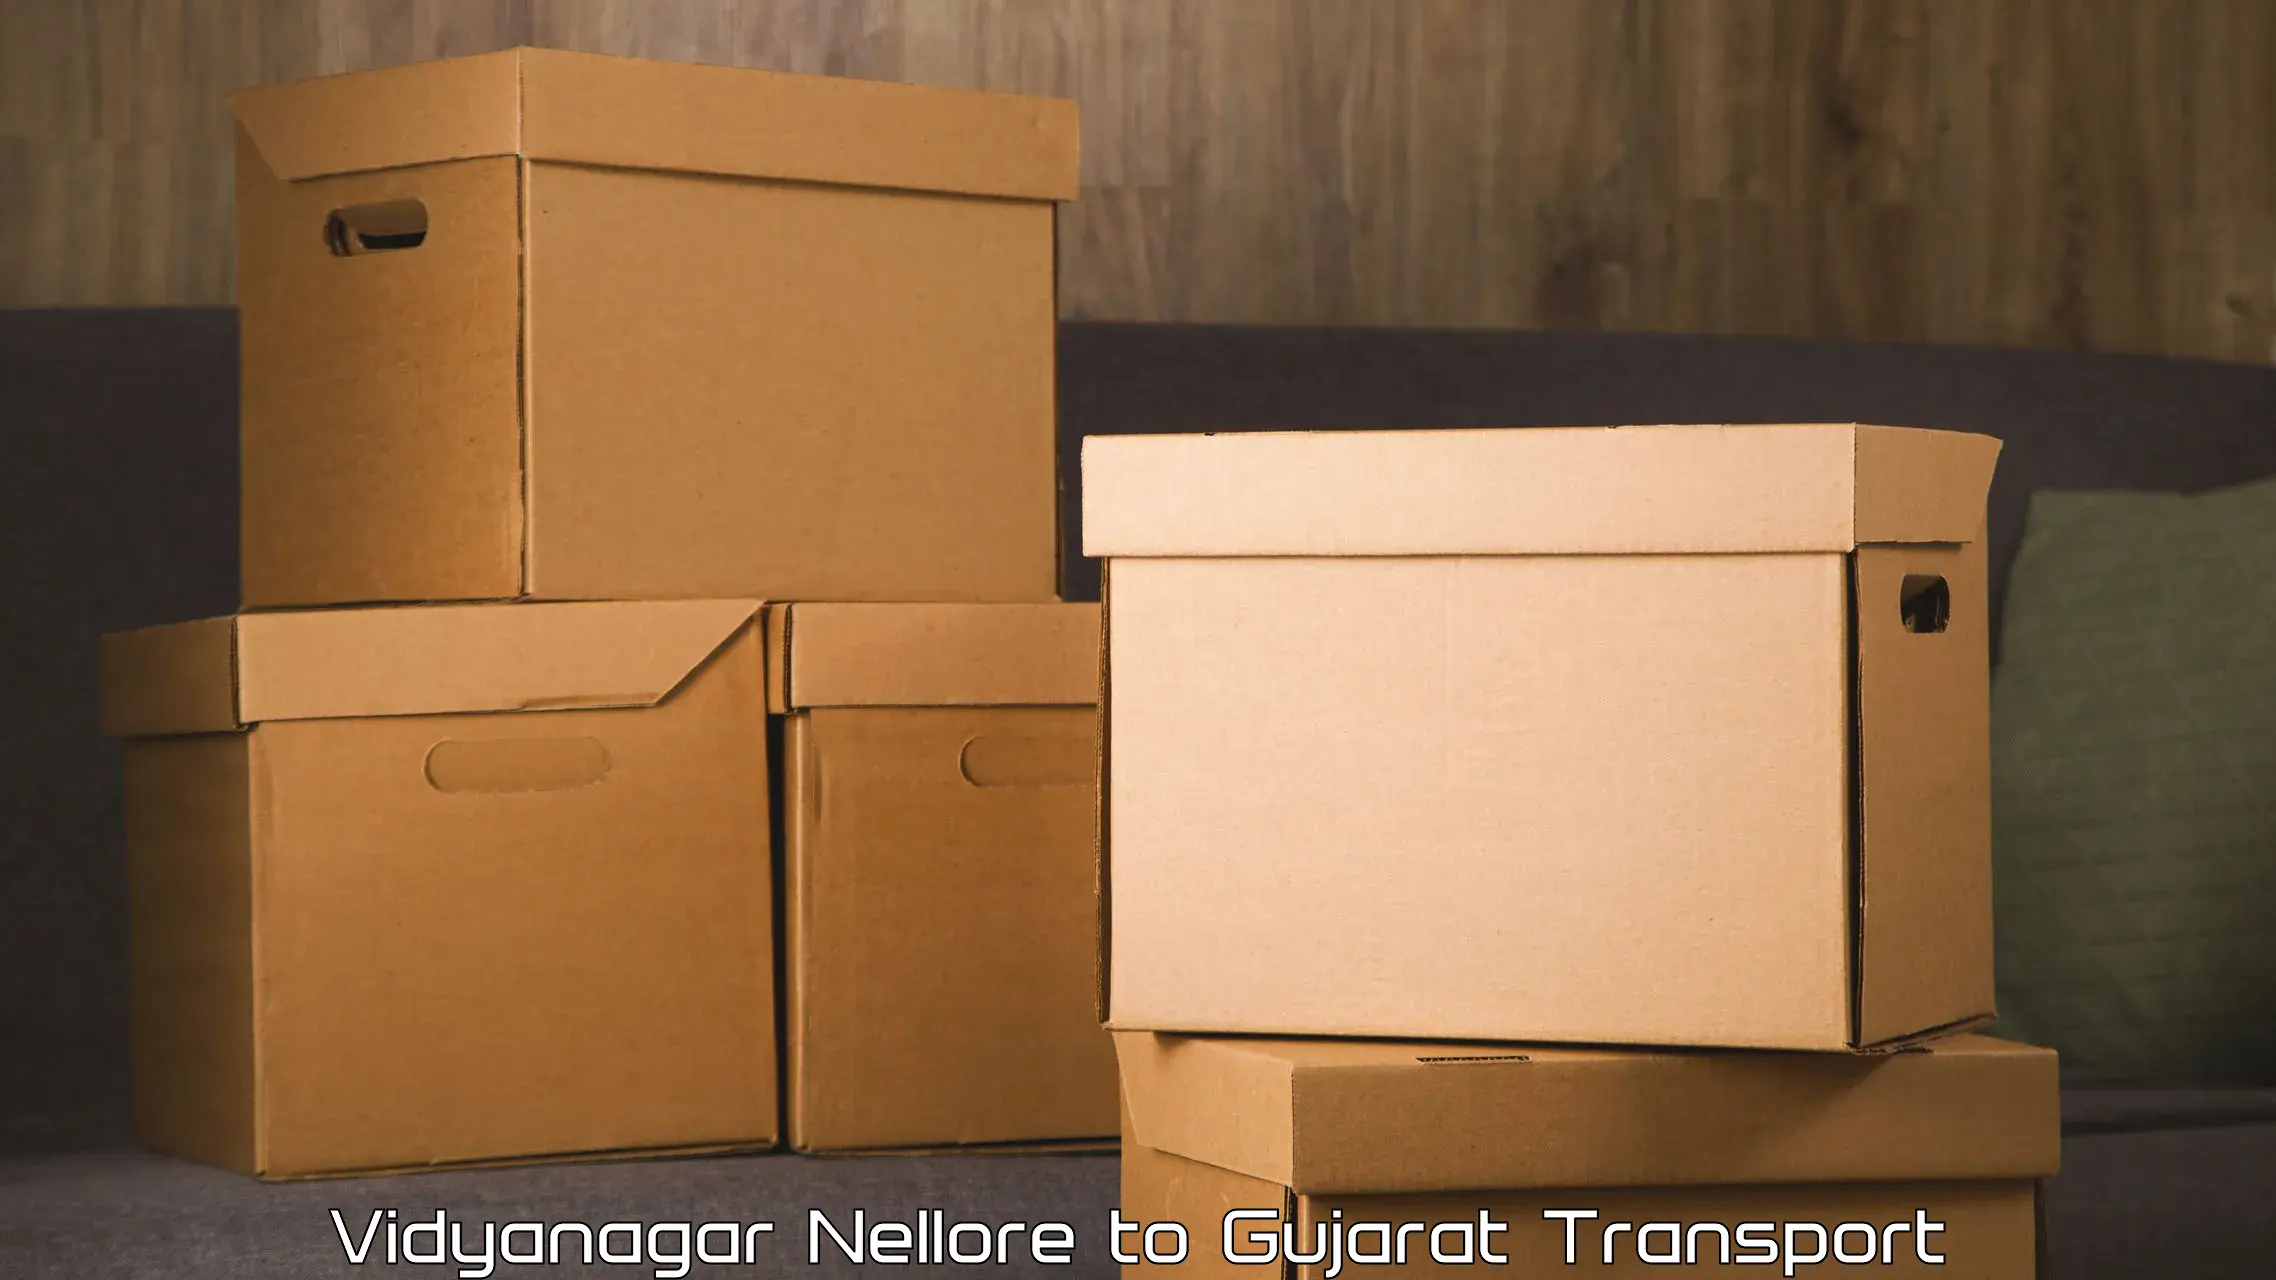 Goods delivery service Vidyanagar Nellore to Anand